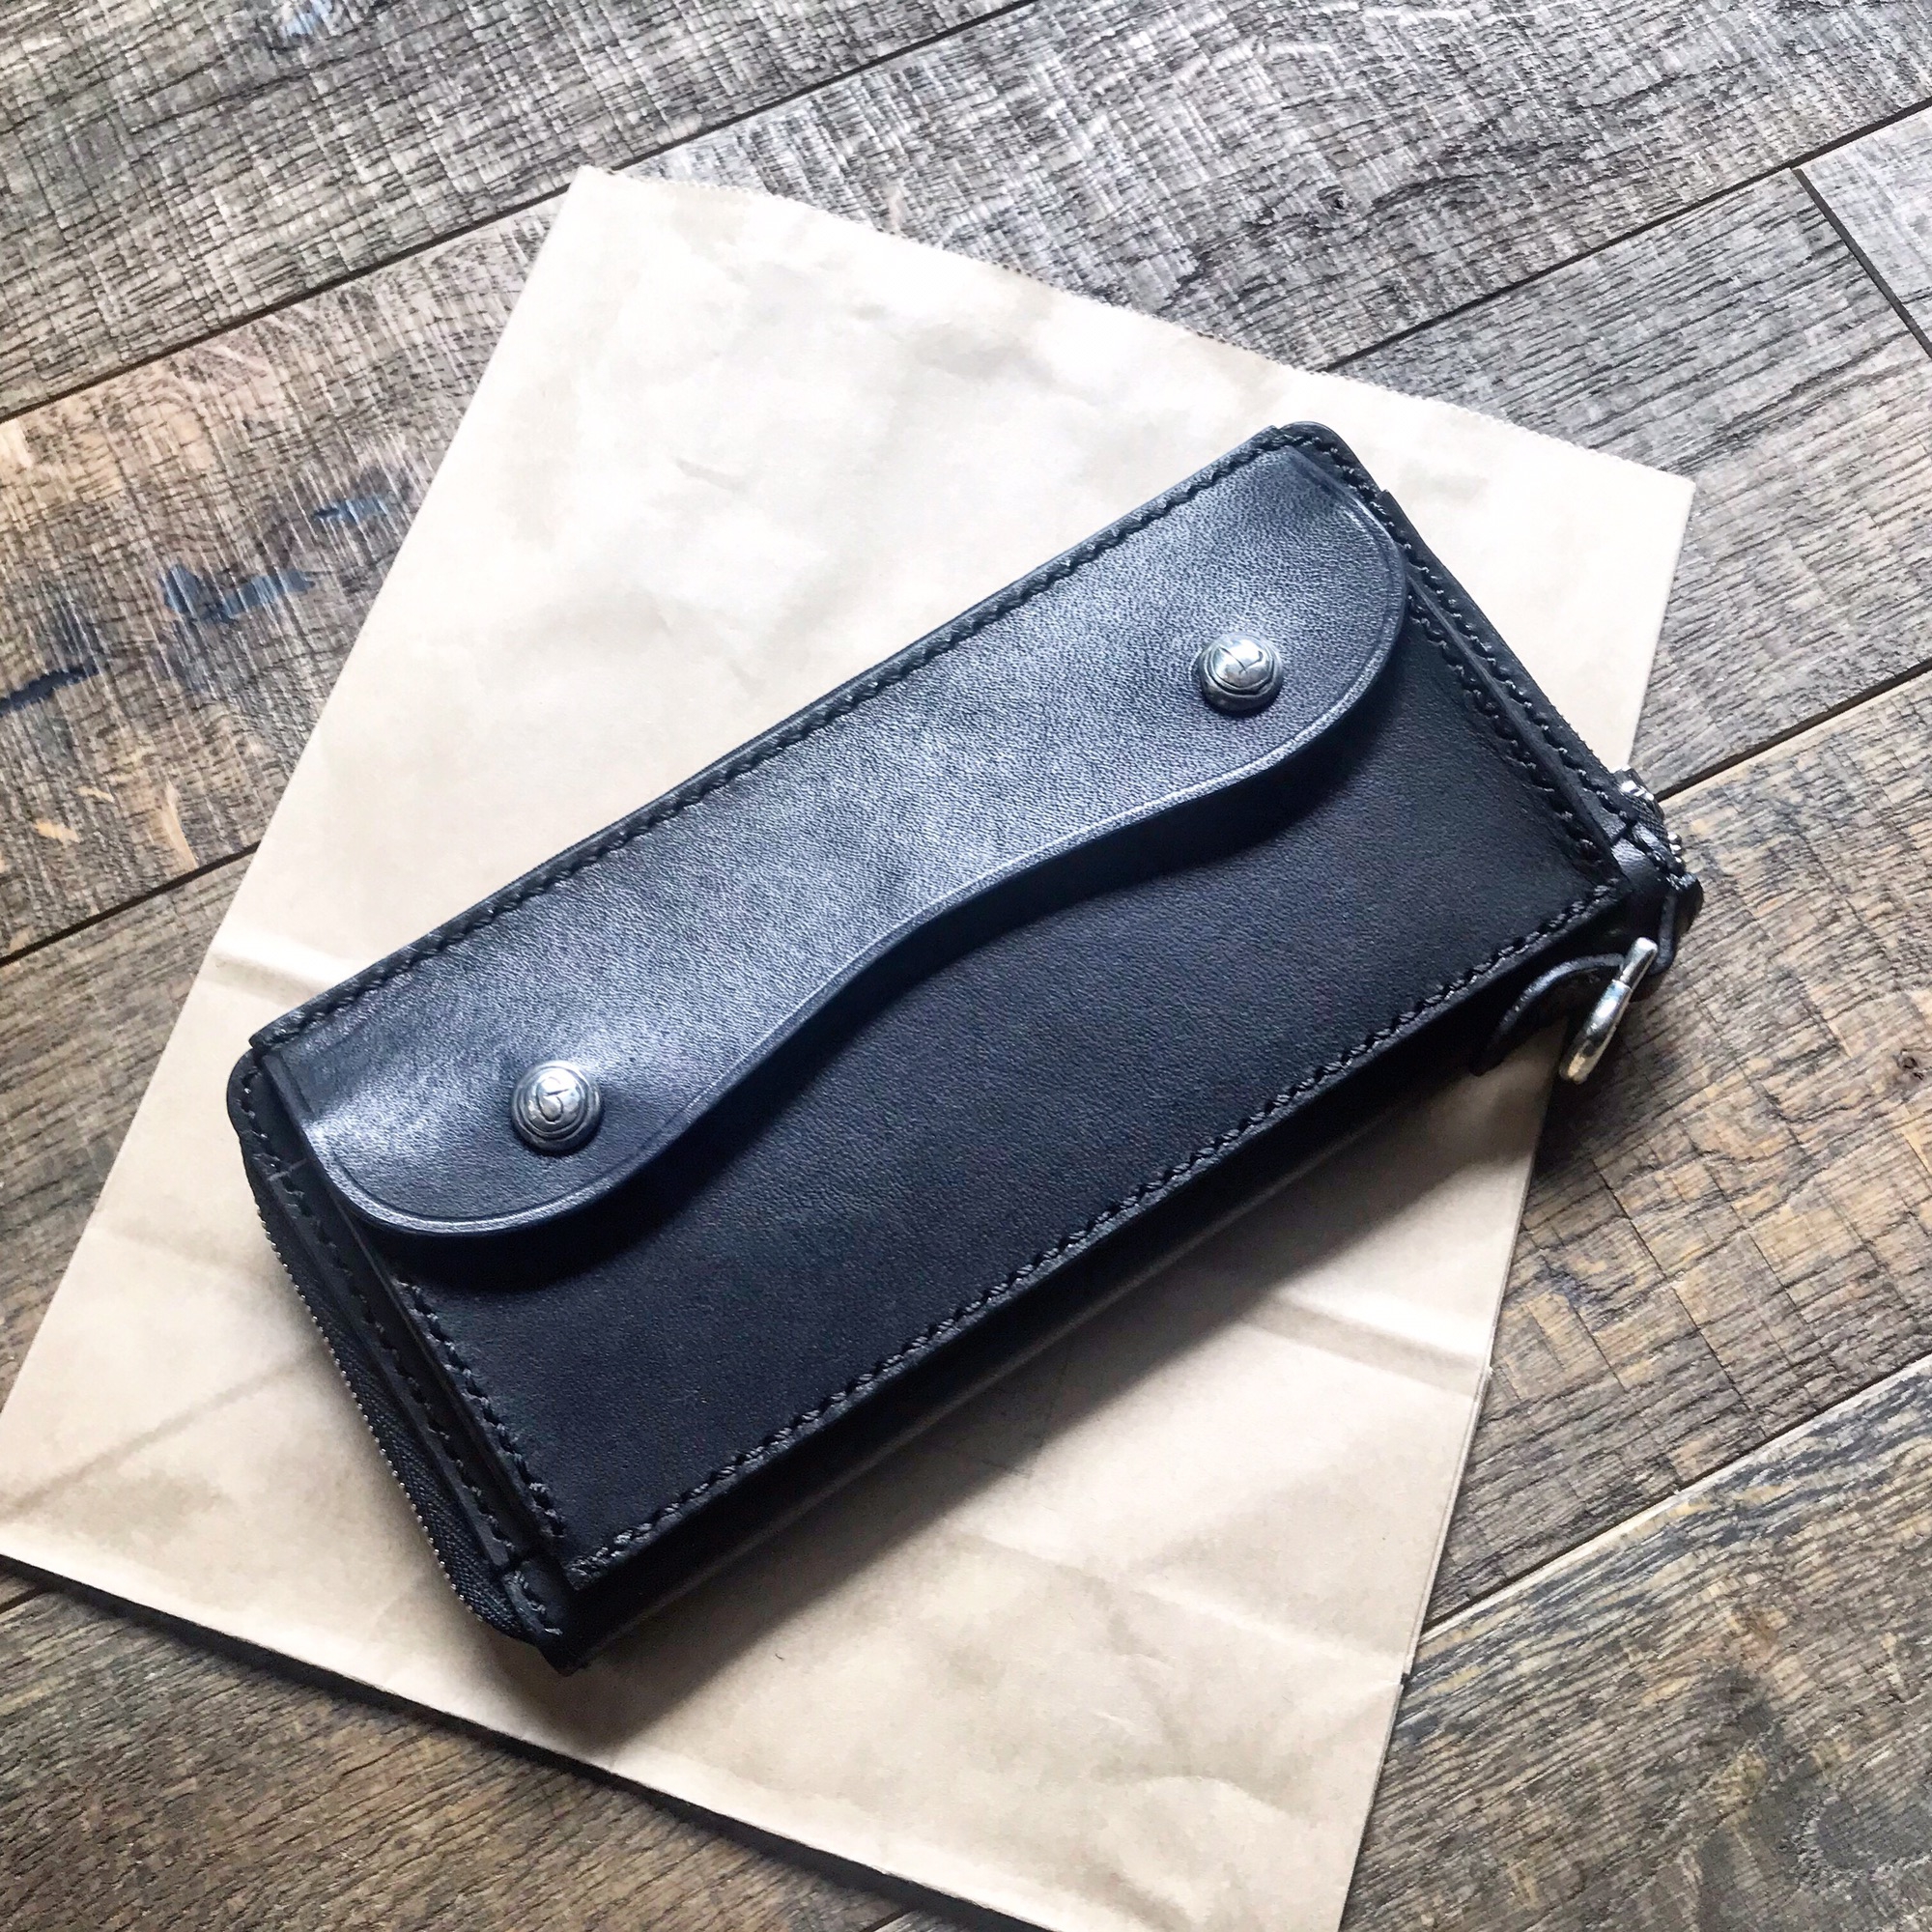 GROK LEATHER 9/1 DELIVERY. | FAGRASS WEB SITE